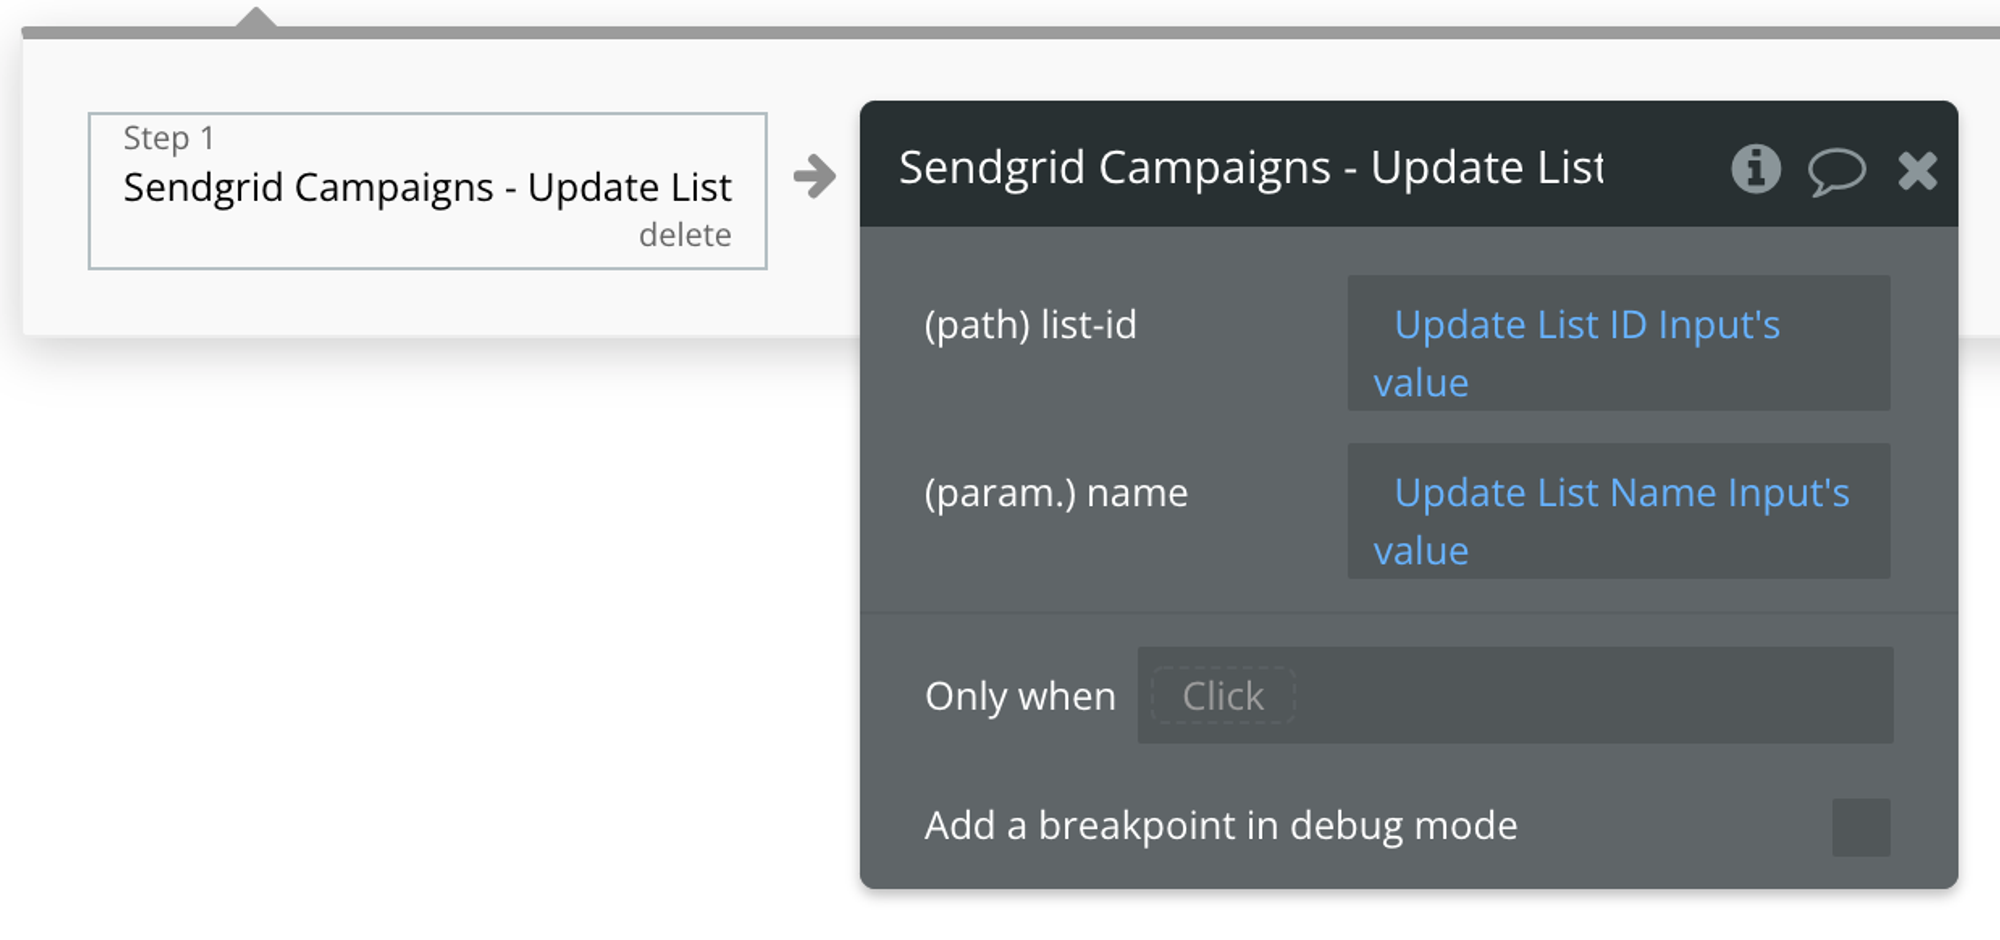 Select Sendgrid Campaigns - Update List from the list of Plugin actions